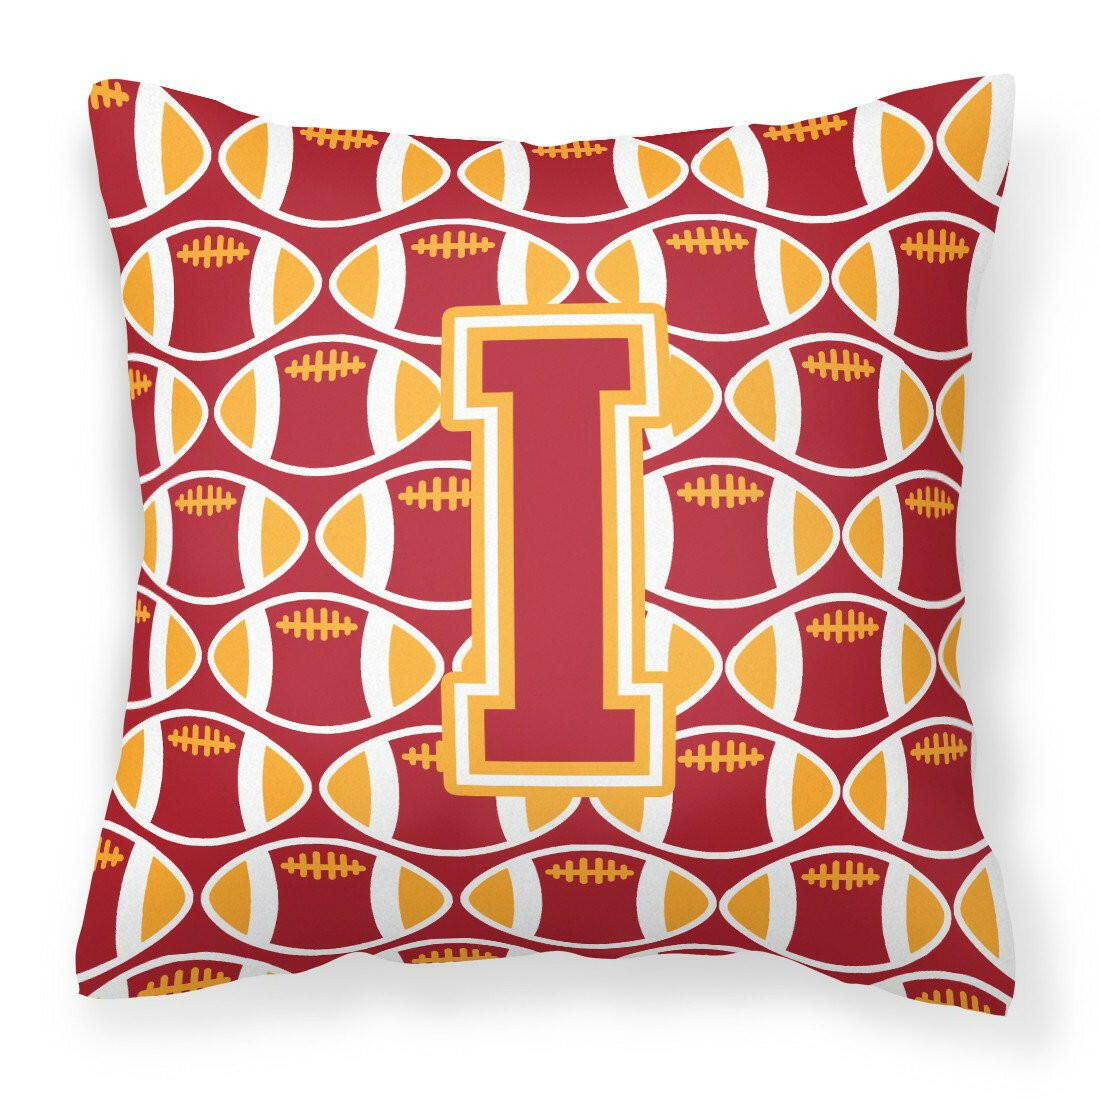 Letter I Football Cardinal and Gold Fabric Decorative Pillow CJ1070-IPW1414 by Caroline's Treasures